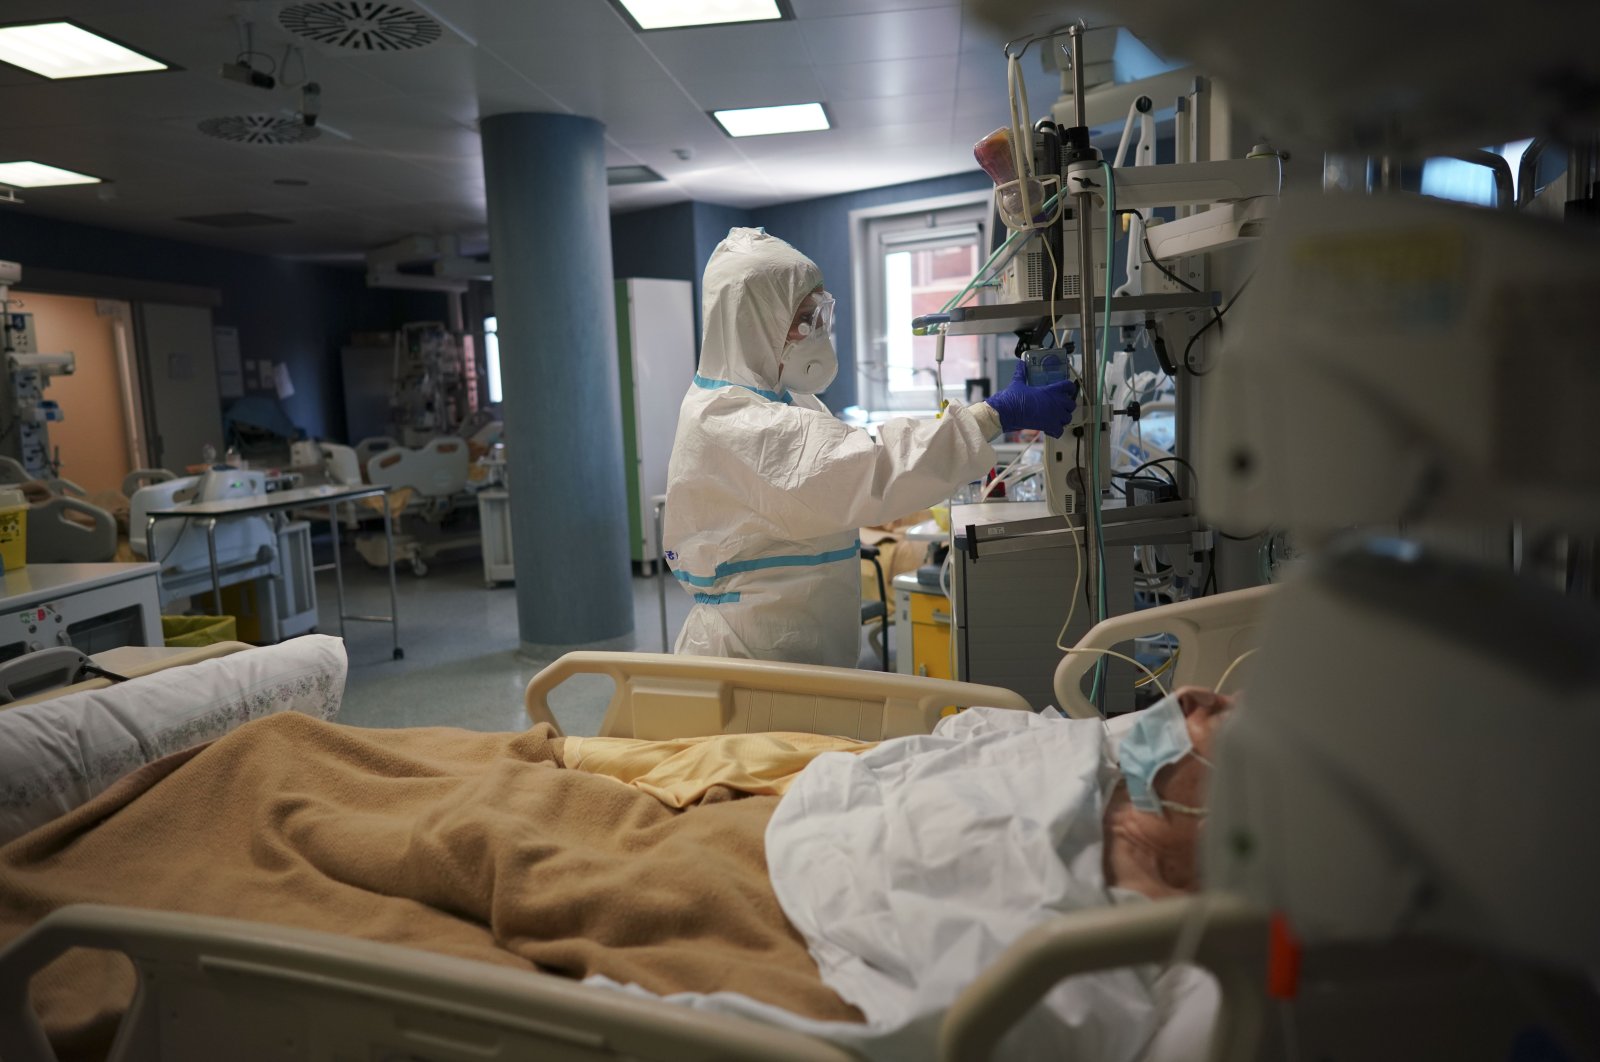 Medical staff tends to a patient in the ICU unit of San Filippo Neri Hospital's COVID-19 department, Rome, Italy, Thursday, April 9, 2020. (AP Photo)